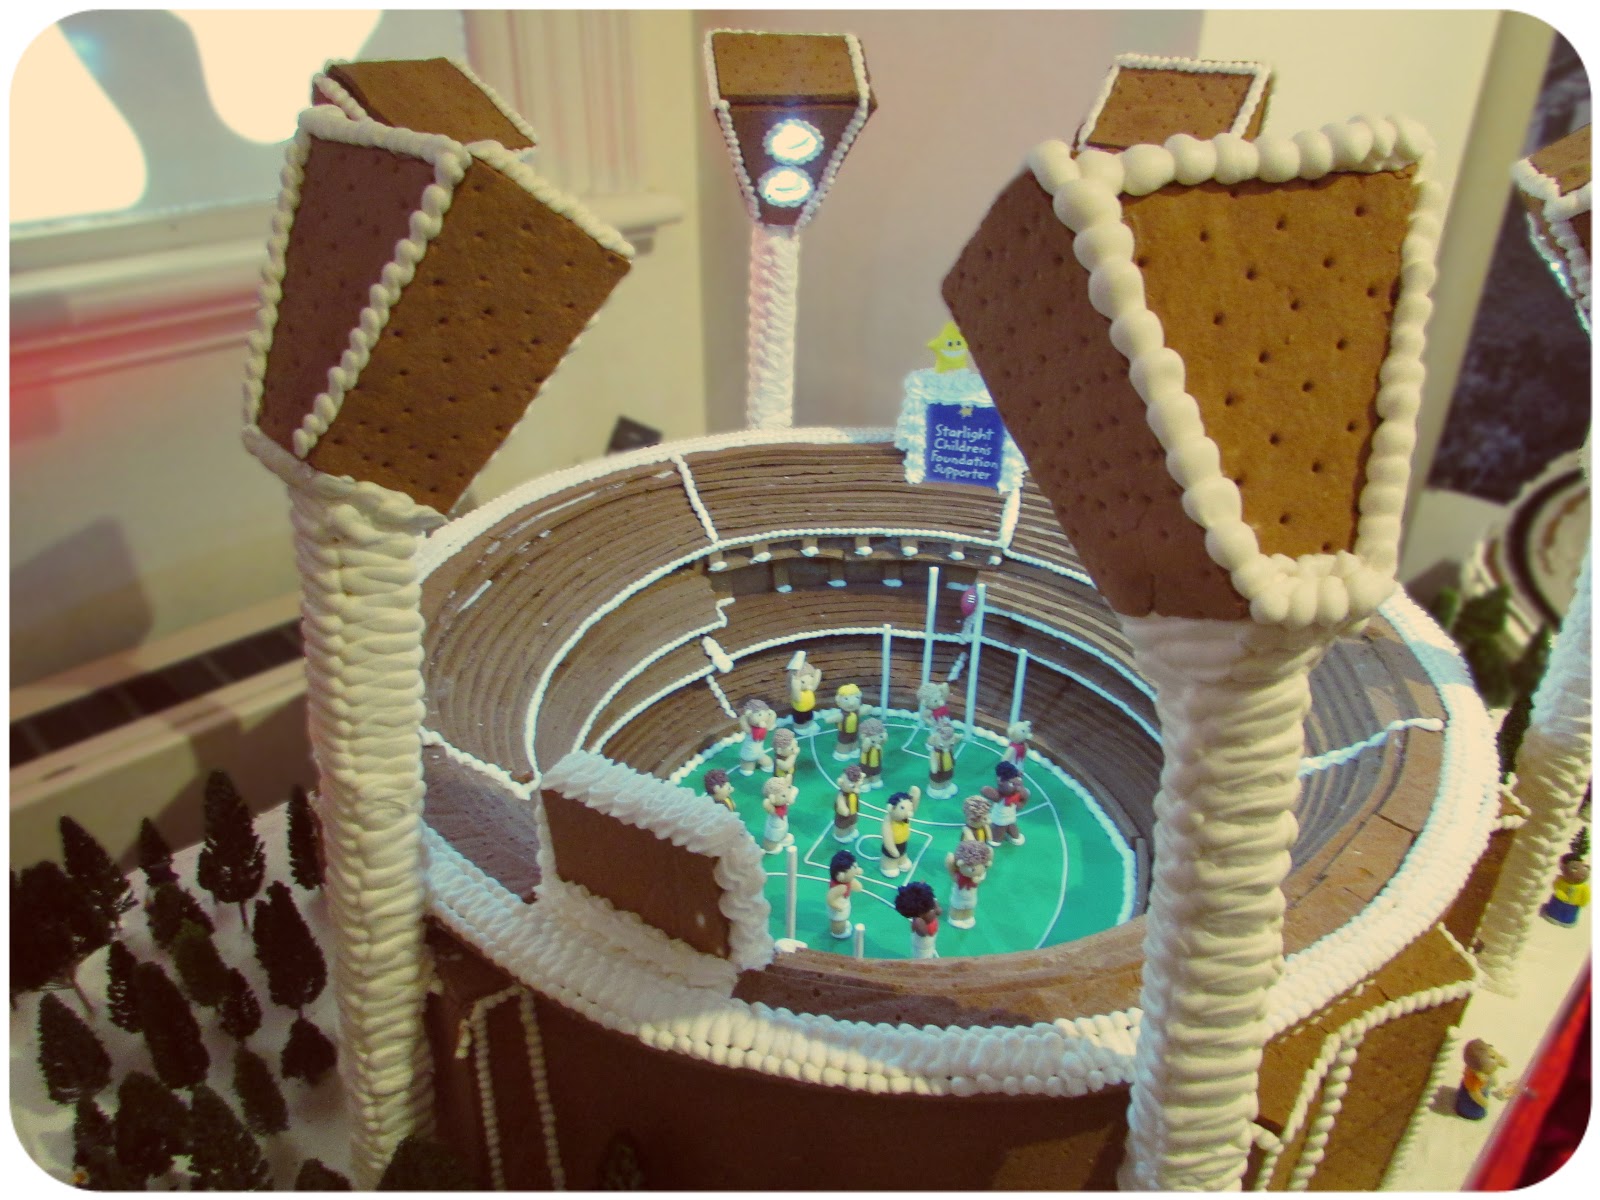 15 Incredibly Impressive Gingerbread Houses Light It Up Guff Images, Photos, Reviews